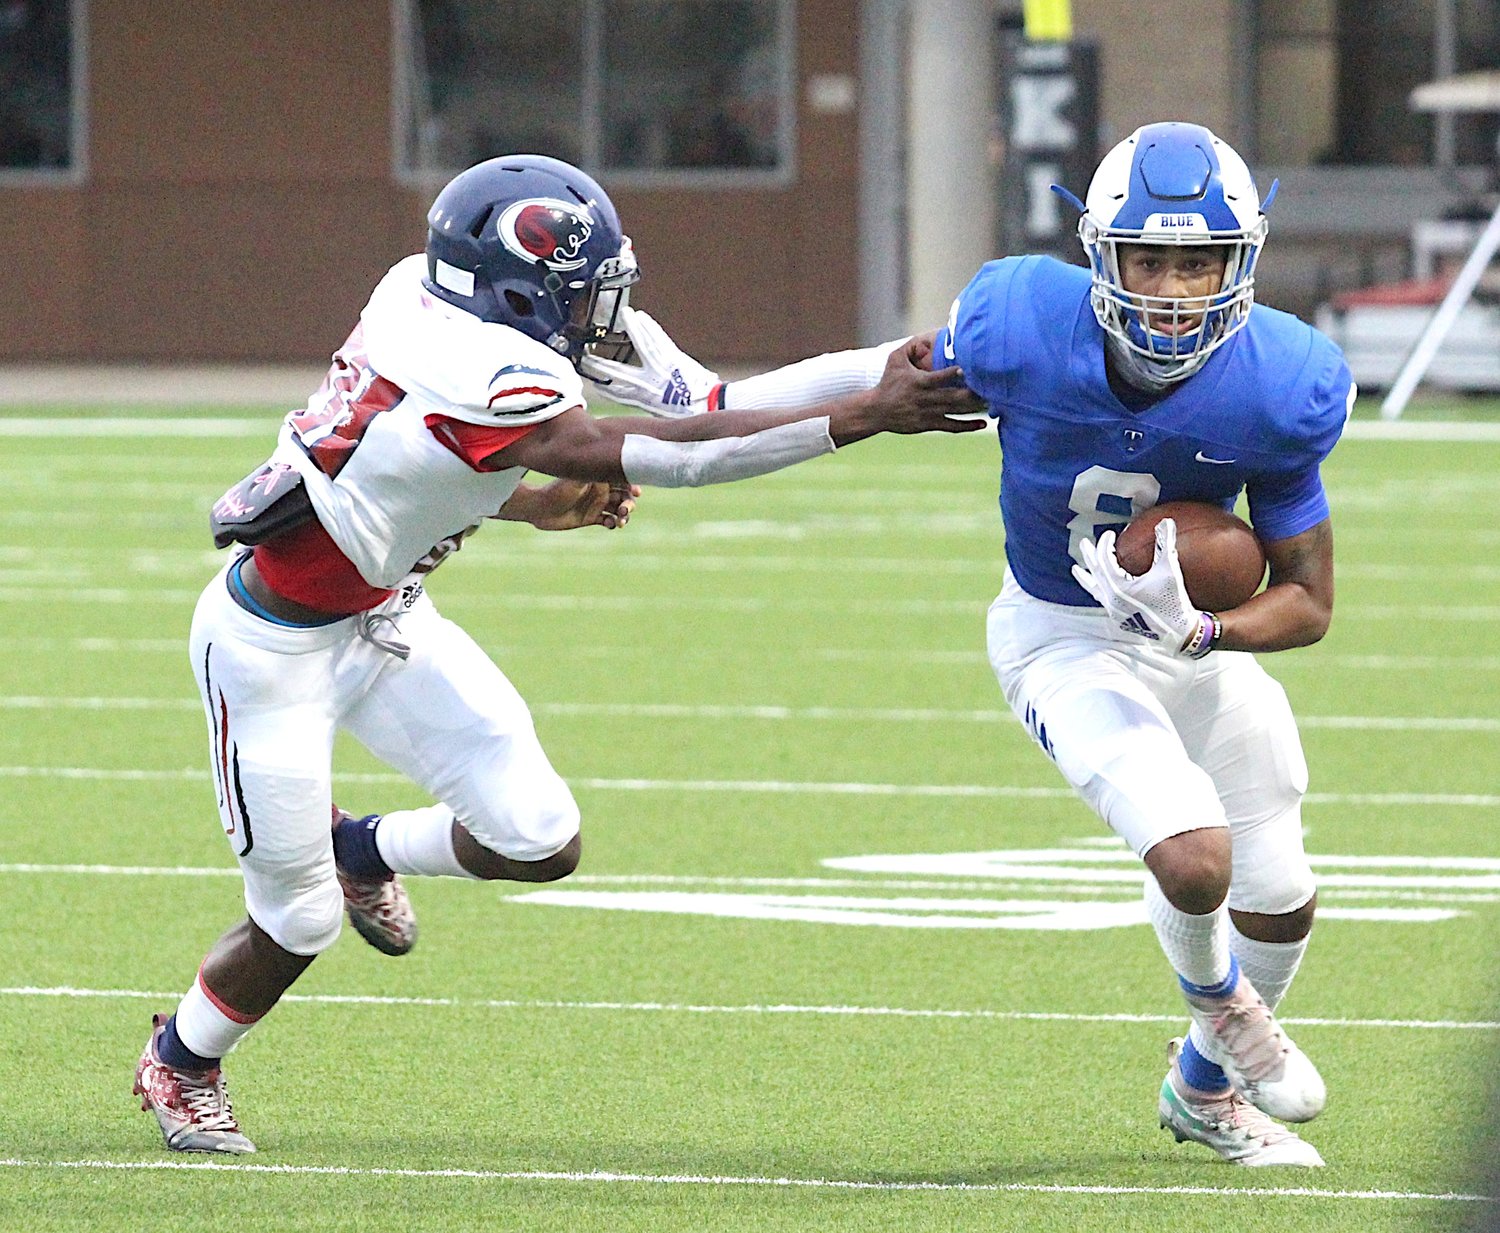 Taylor senior receiver Tyrone Irving runs after the catch during Thursday's game against Cy-Springs at Legacy Stadium.